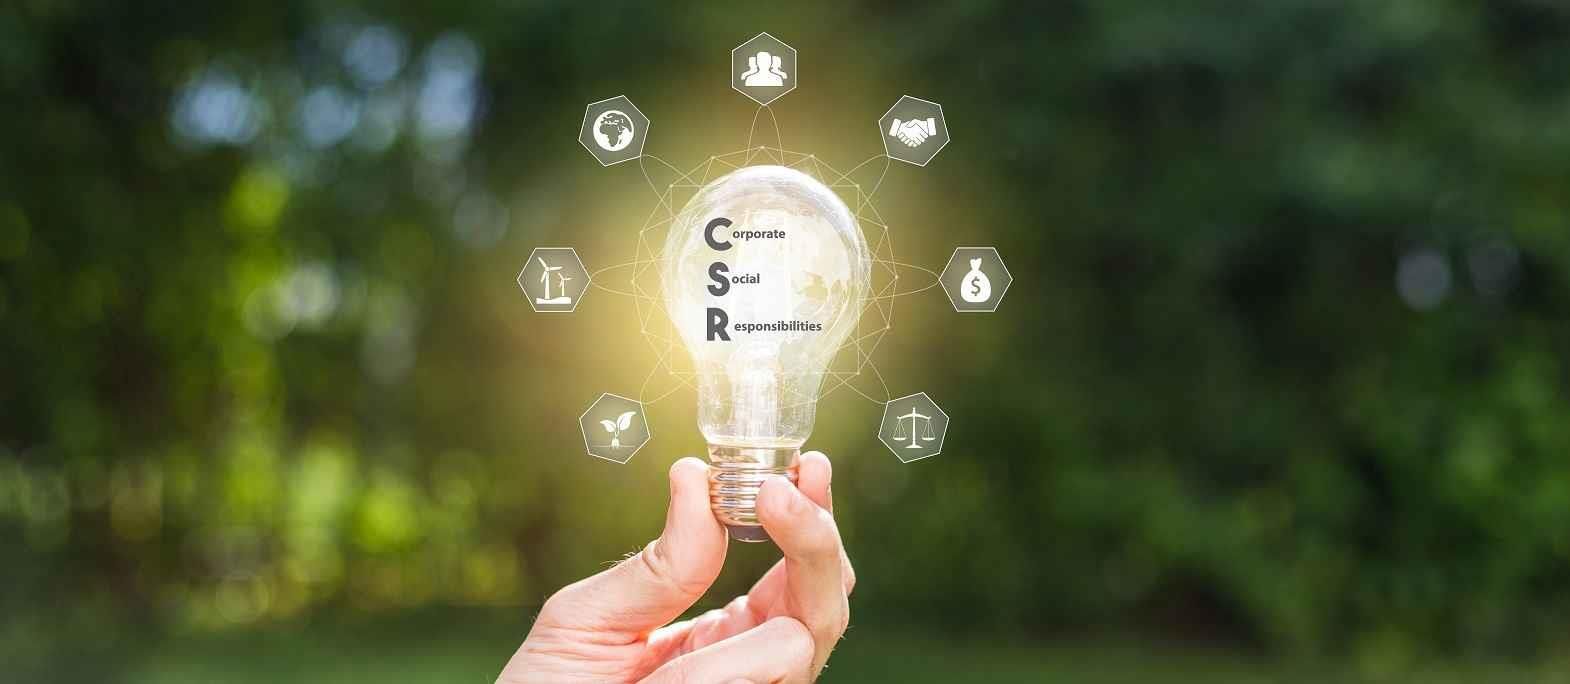 Corporate Social Responsibility (CSR) and Ethics in Marketing